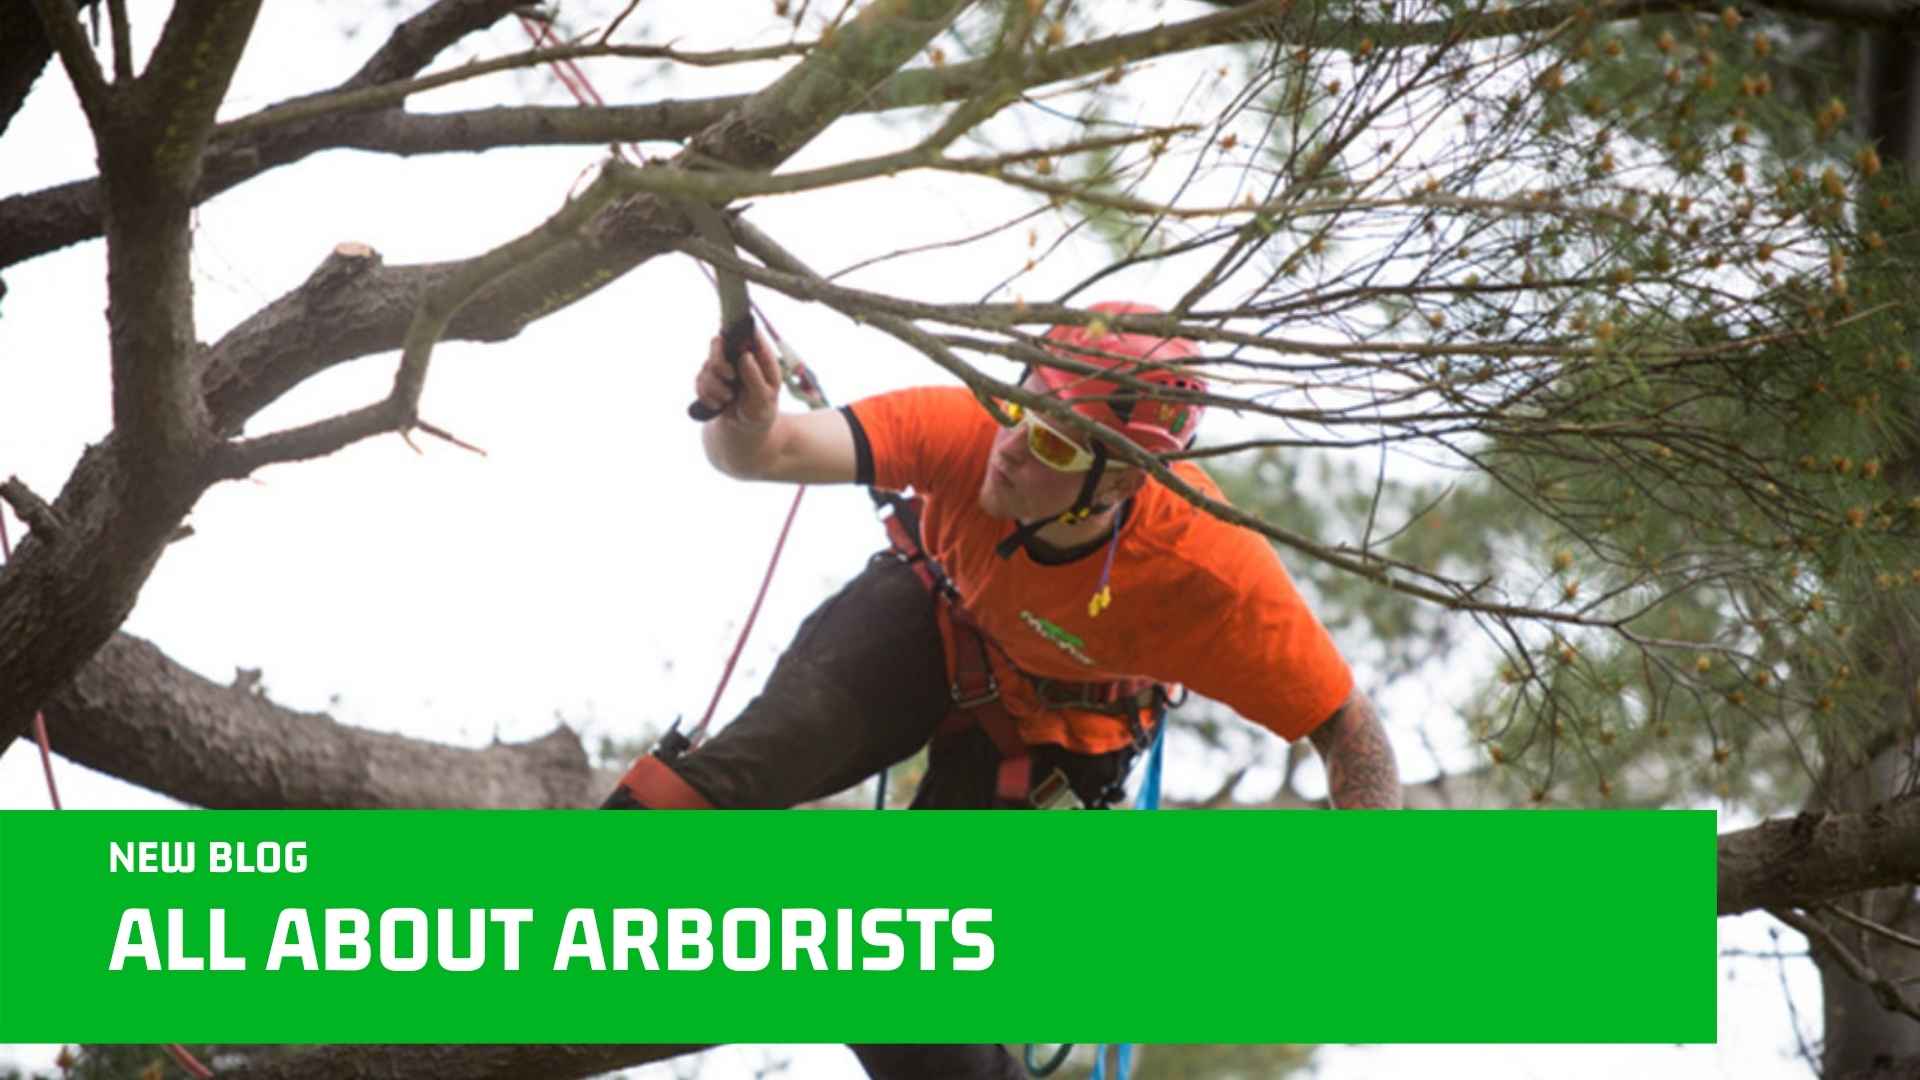 All About Arborists - The Top 10 Things You Need To Know